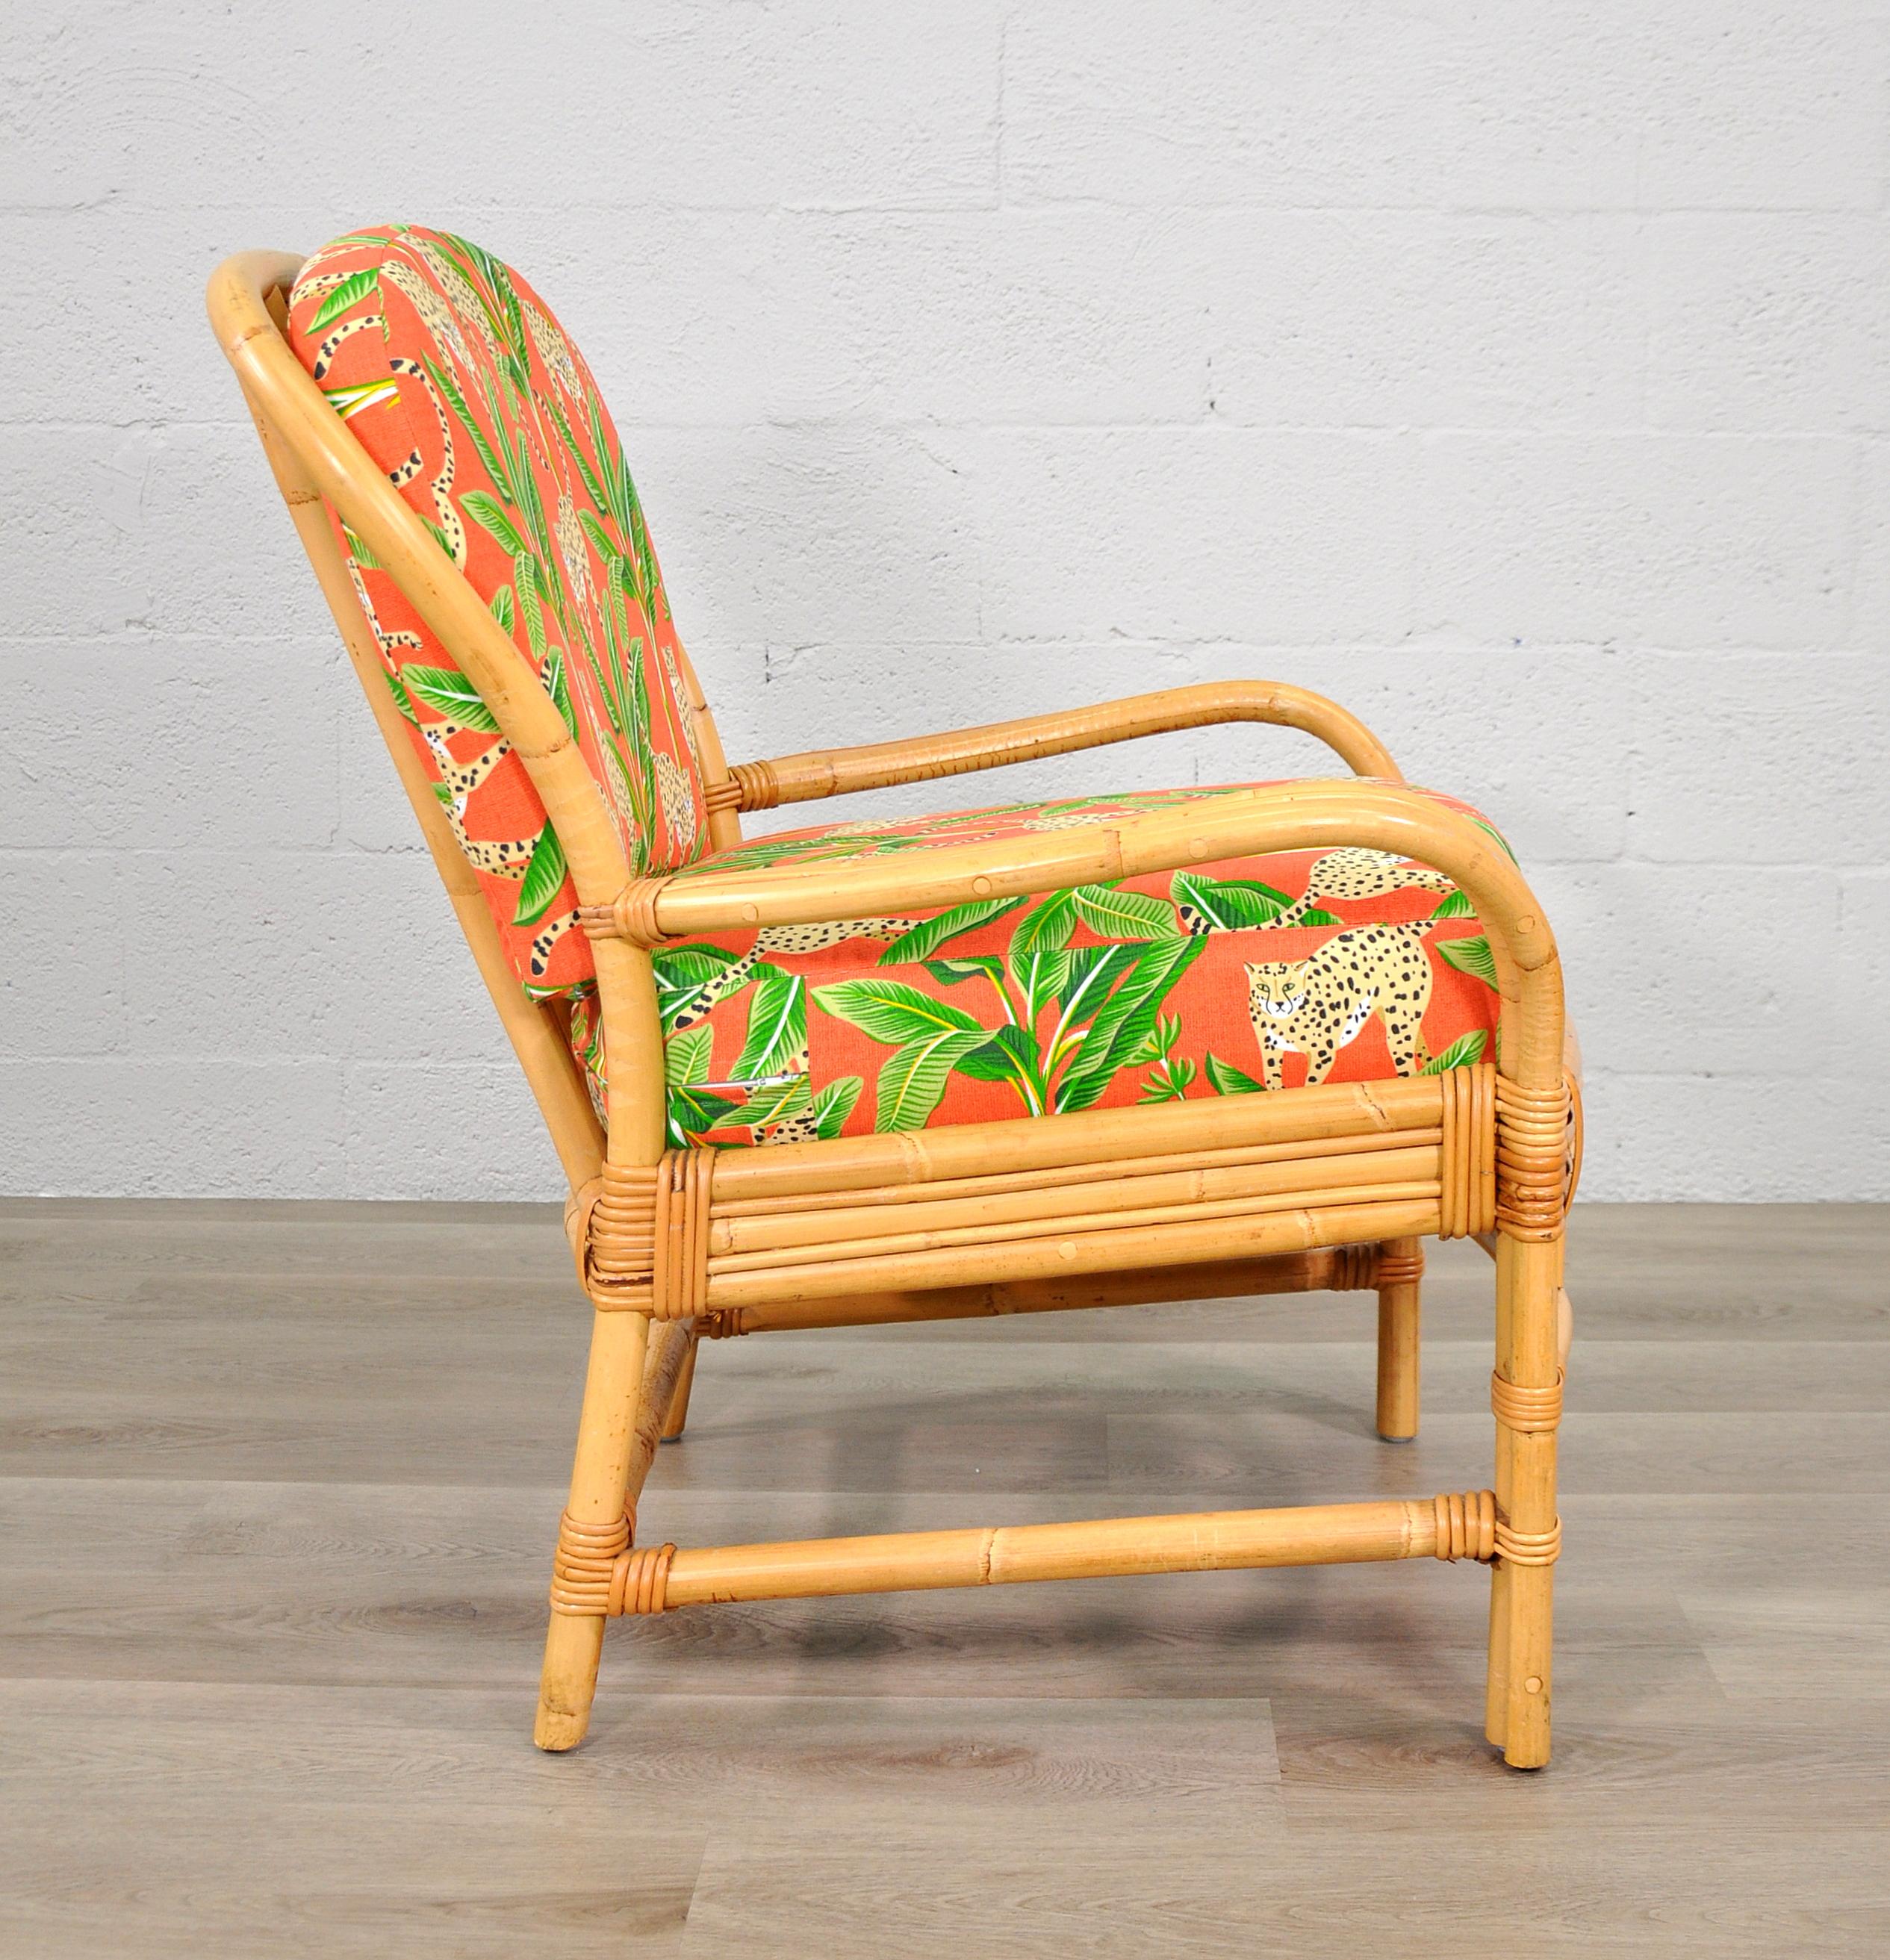 Late 20th Century Rattan Chair with Tropical Cheetah and Palm Fabric For Sale